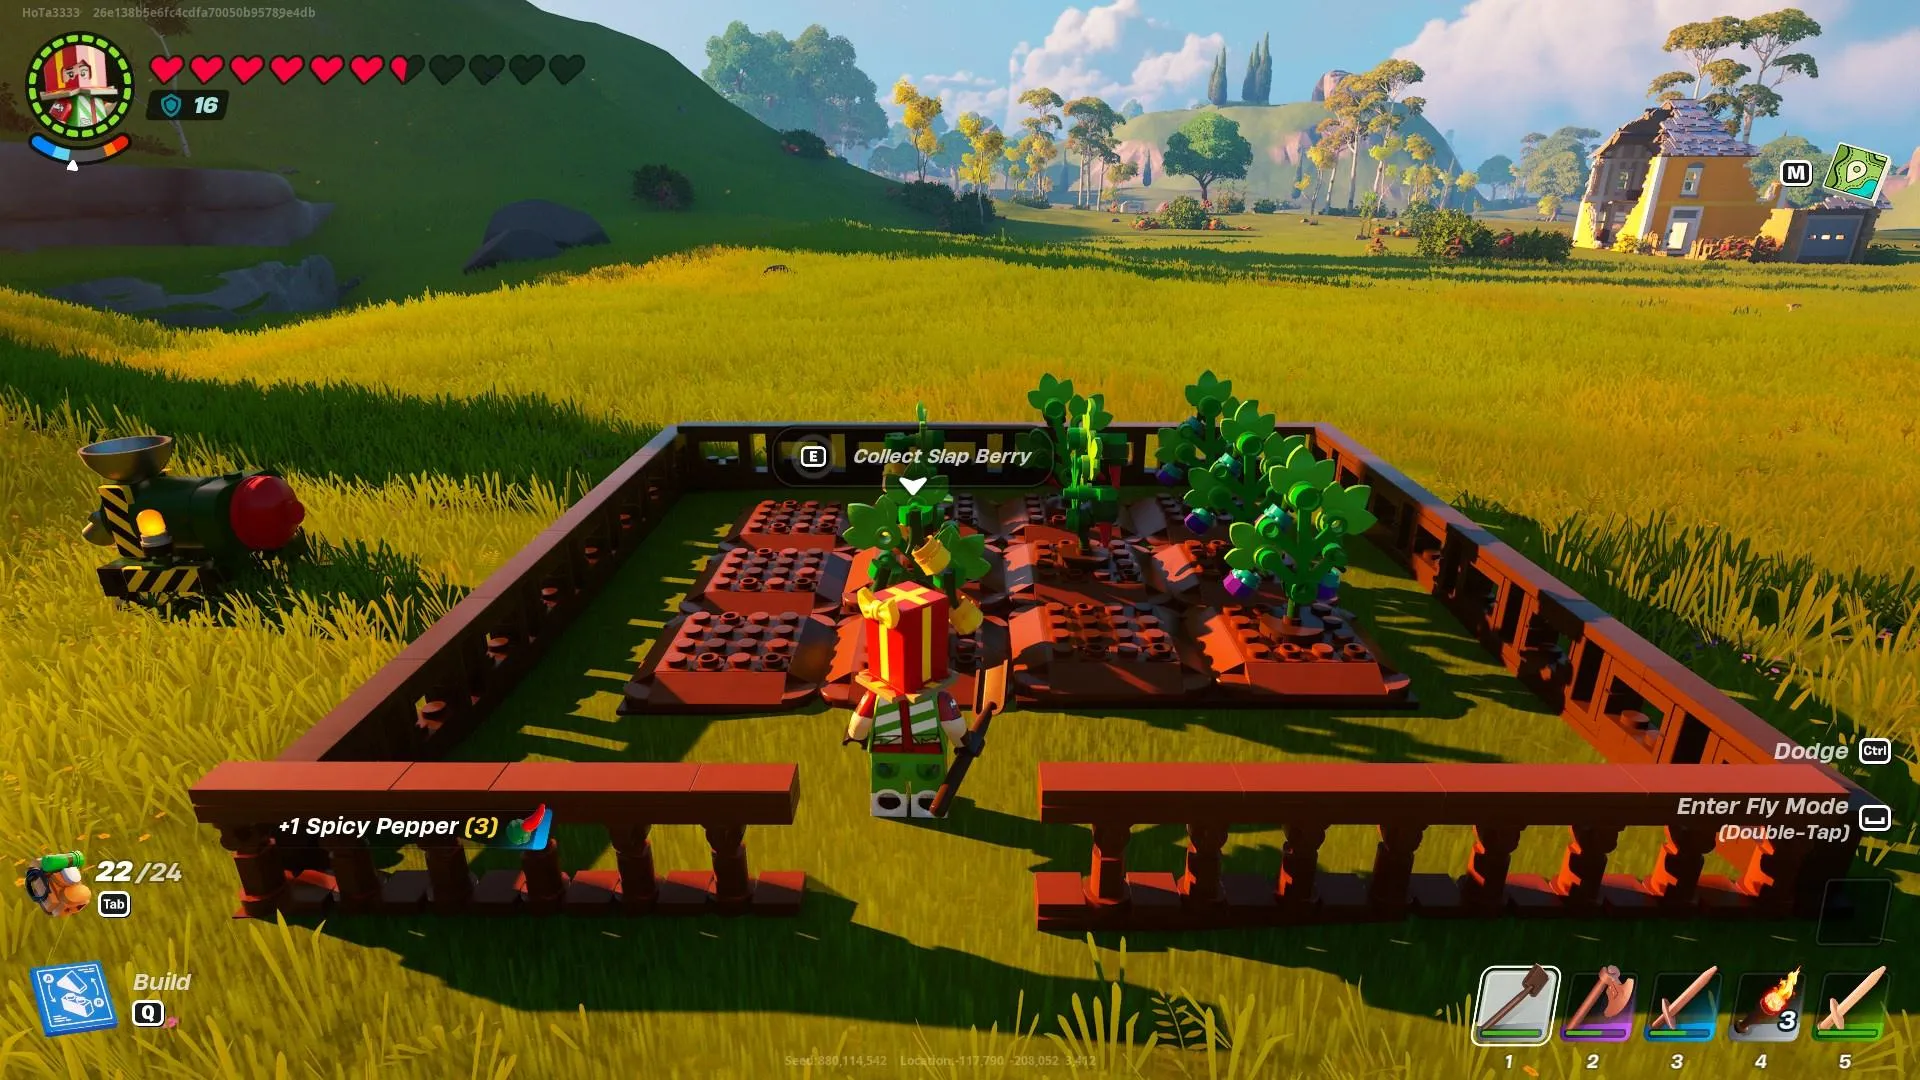 How to make a garden in LEGO Fortnite